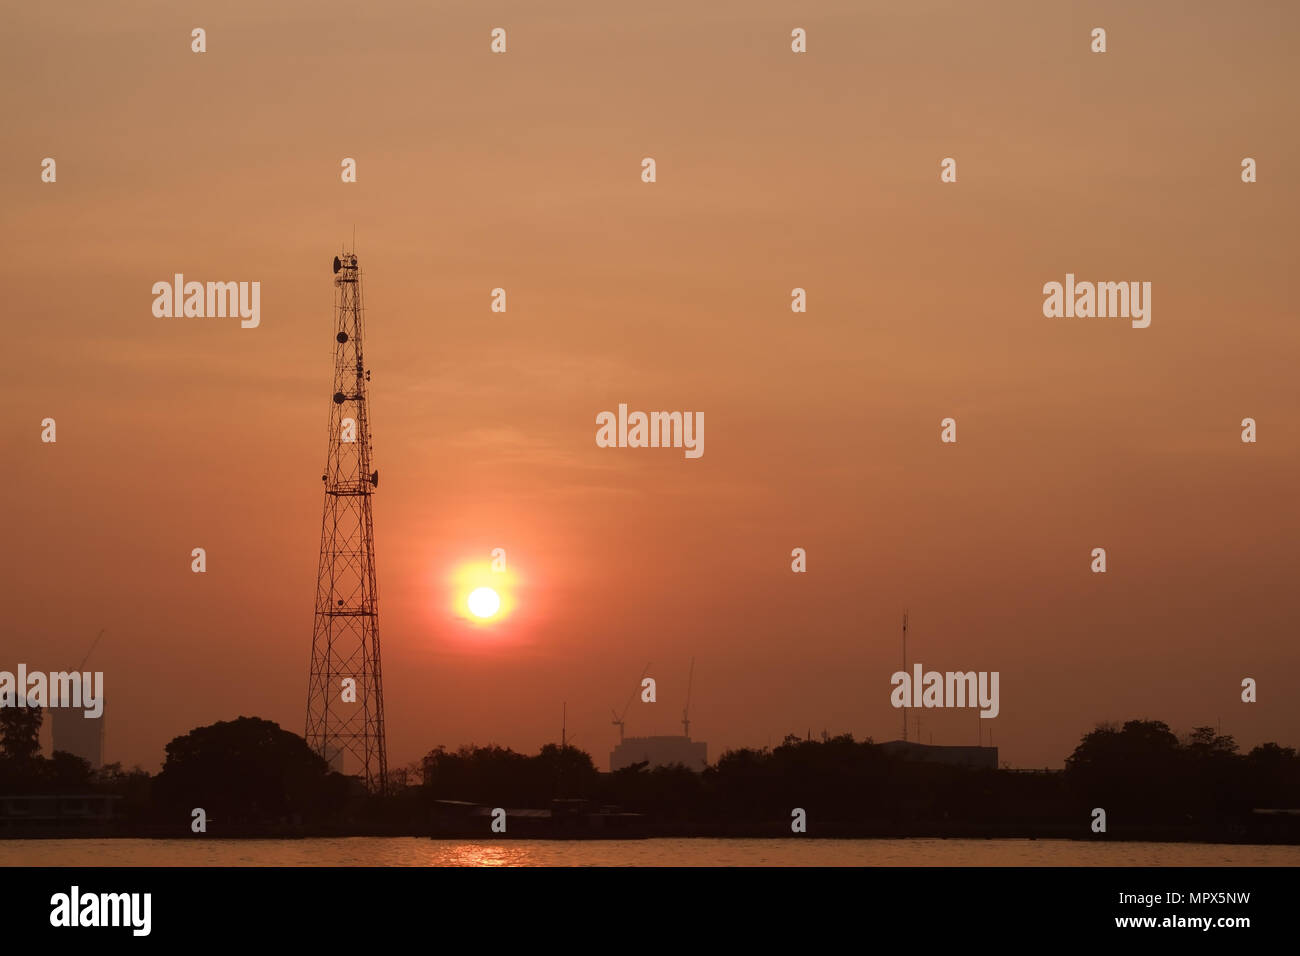 Silhouette of radio antenna tower in the morning. Stock Photo